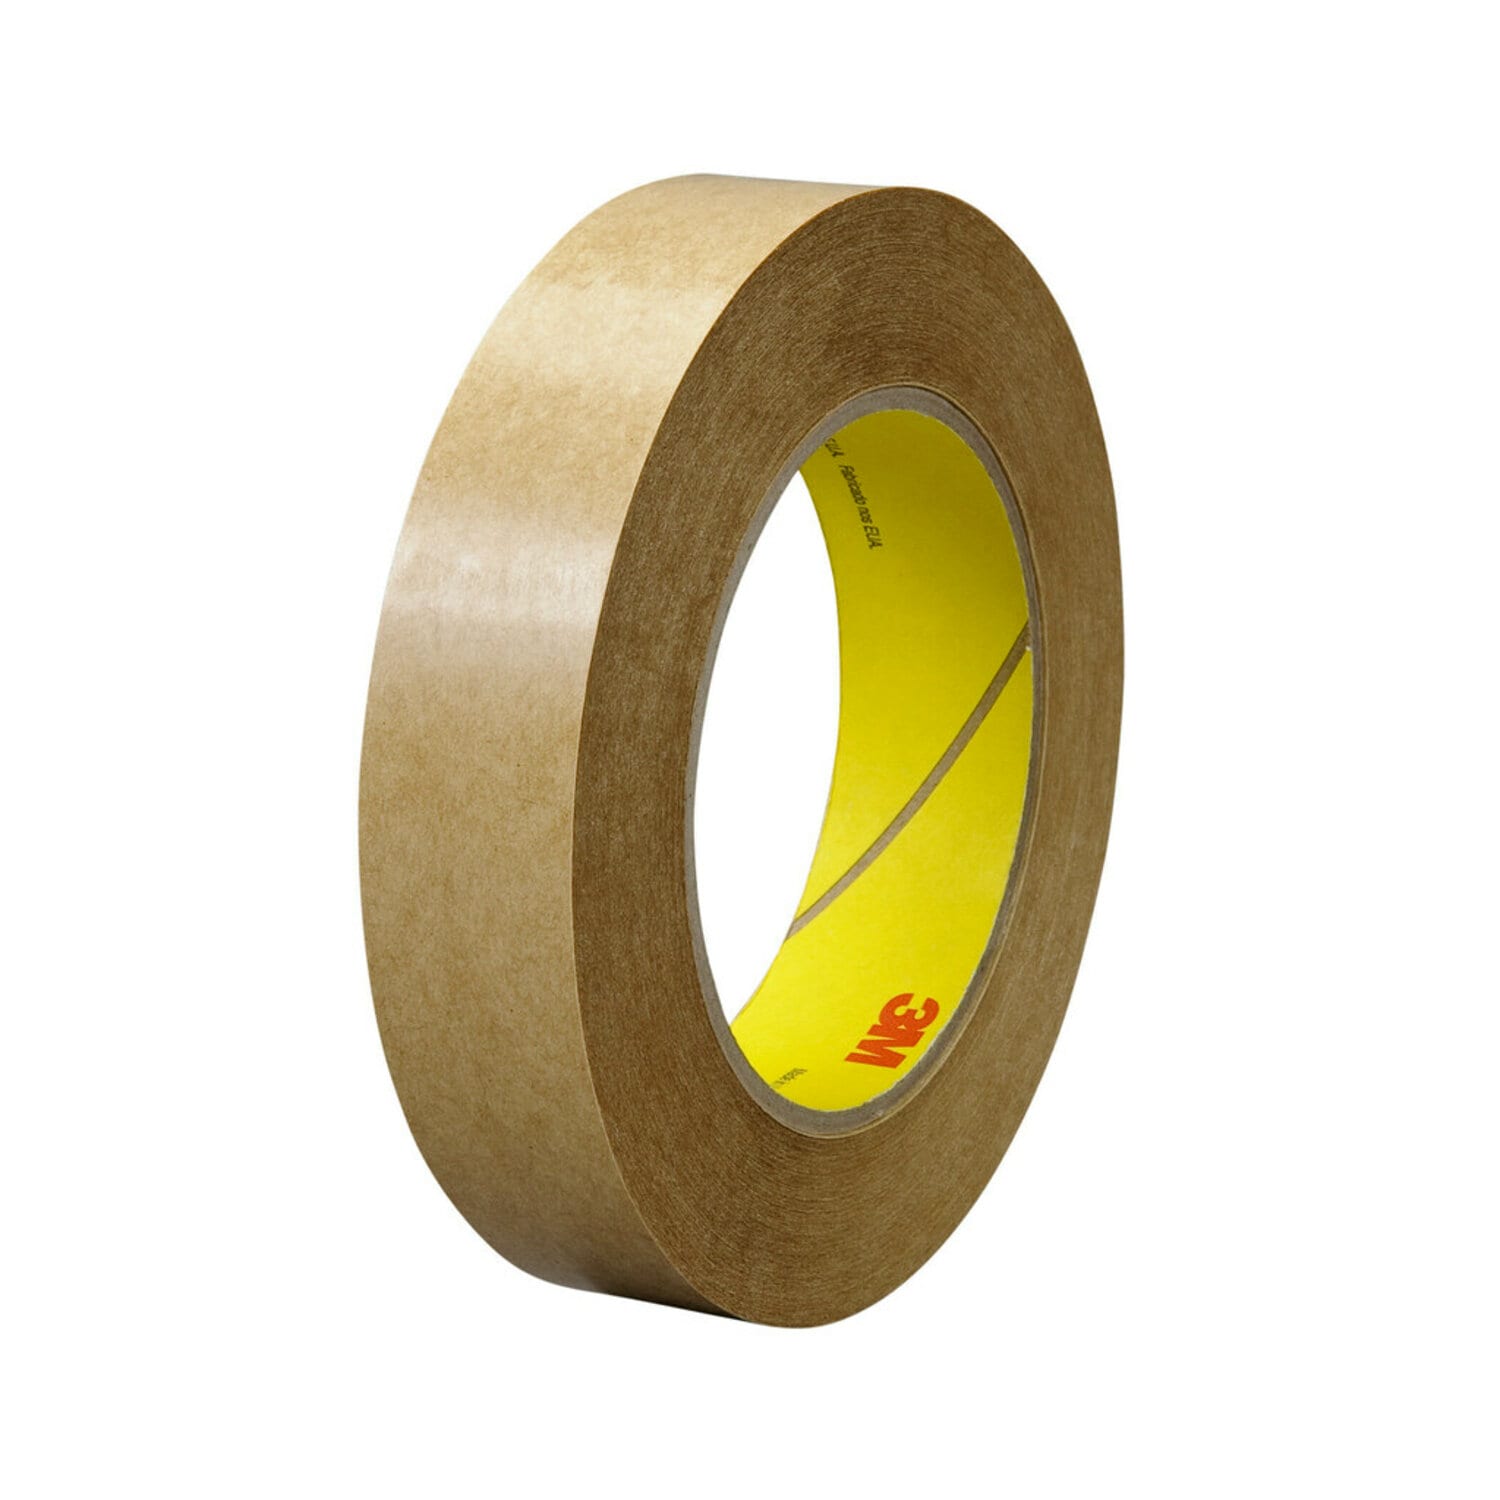 7010299634 - 3M Adhesive Transfer Tape 463, Clear, 3/8 in x 60 yd, 2 mil, 96 rolls
per case